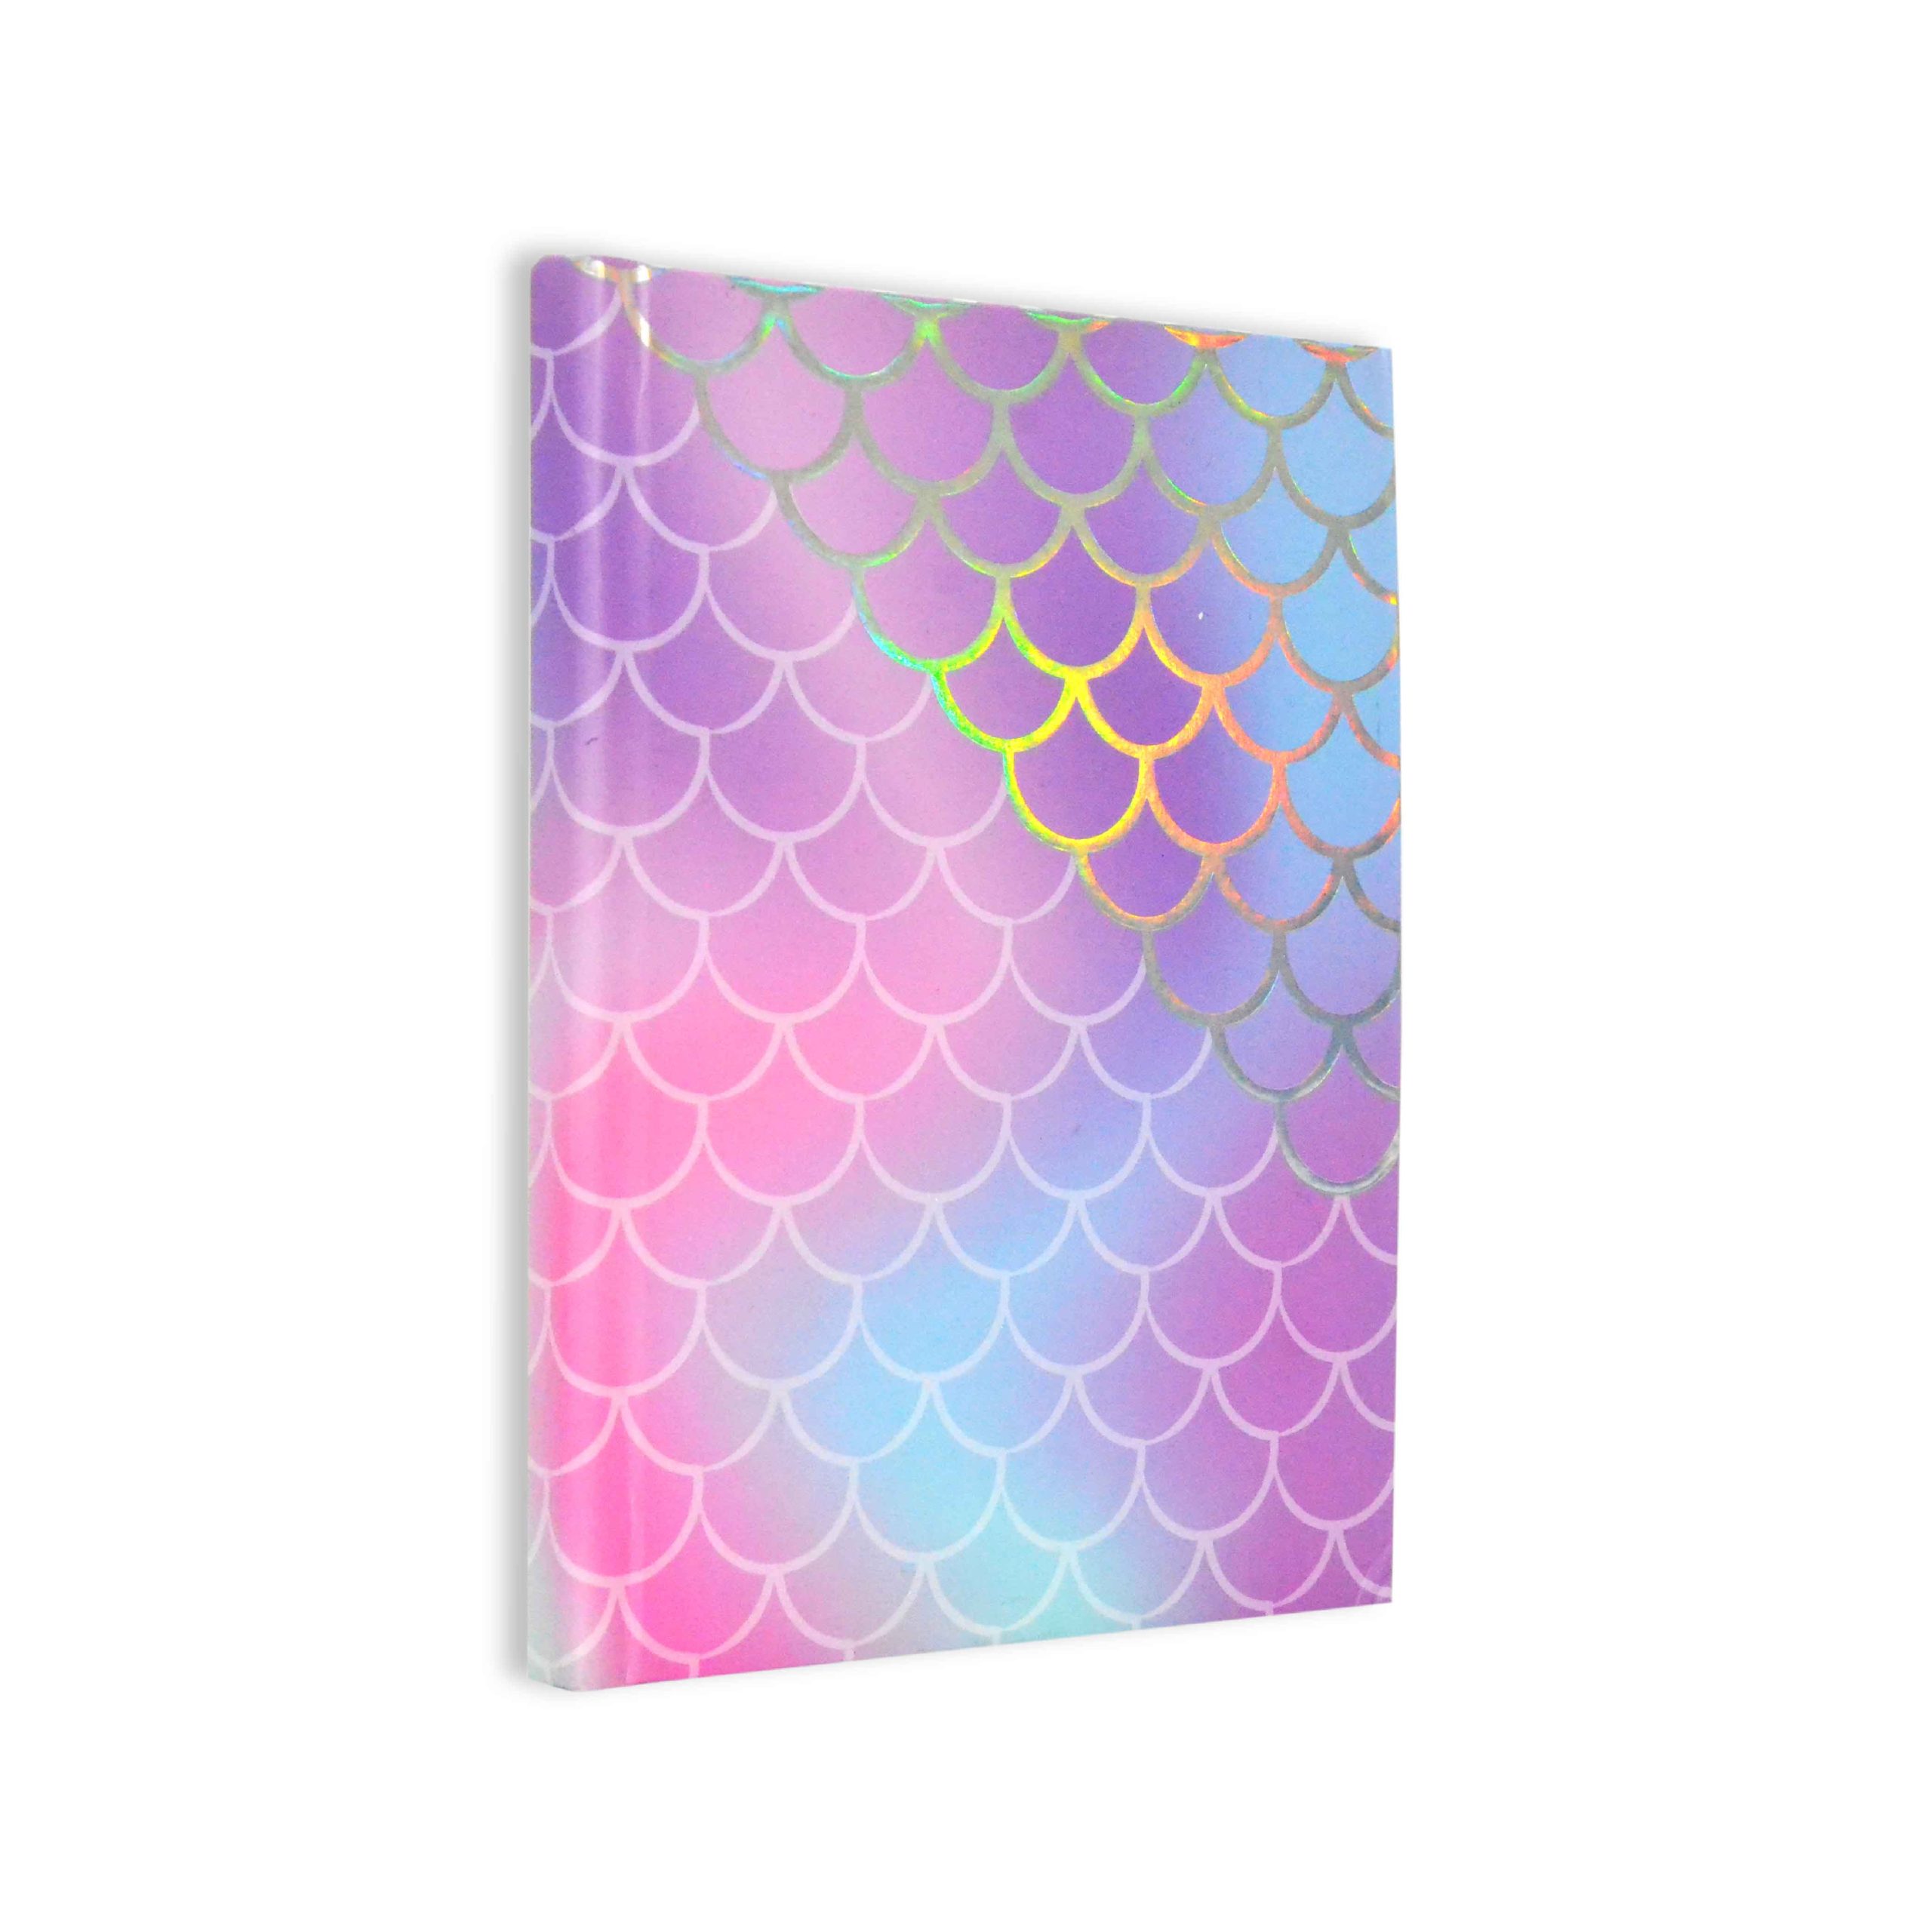 ST2707 Mermaid A6 Note Book Ruled 120 pgs 01 scaled